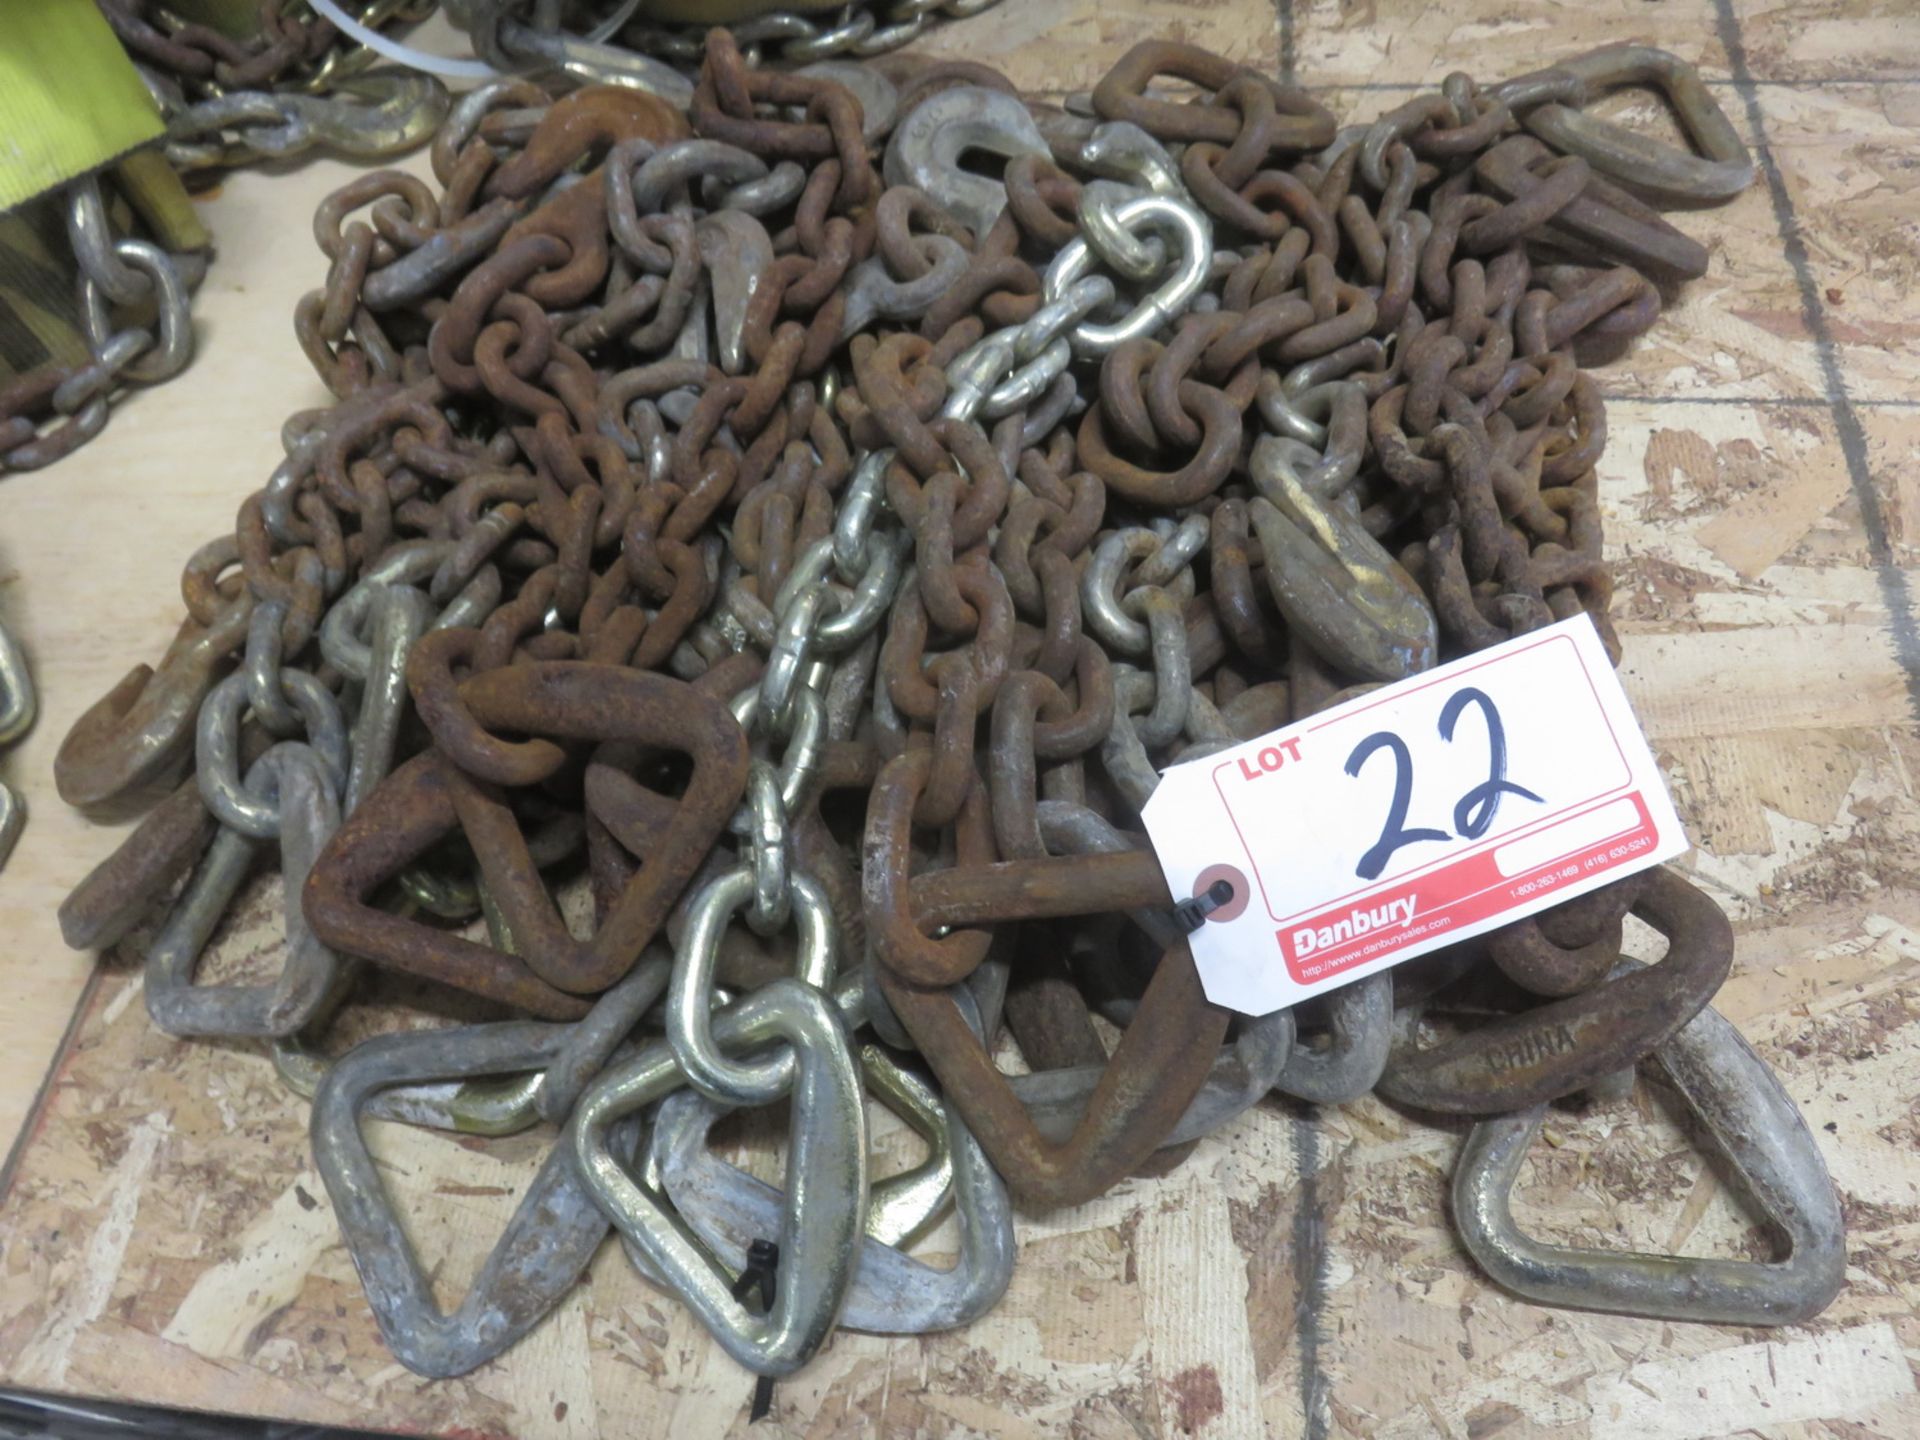 LOT - STEEL APPRX 20" CHAIN UNITS (APPROX. 22 PIECES)